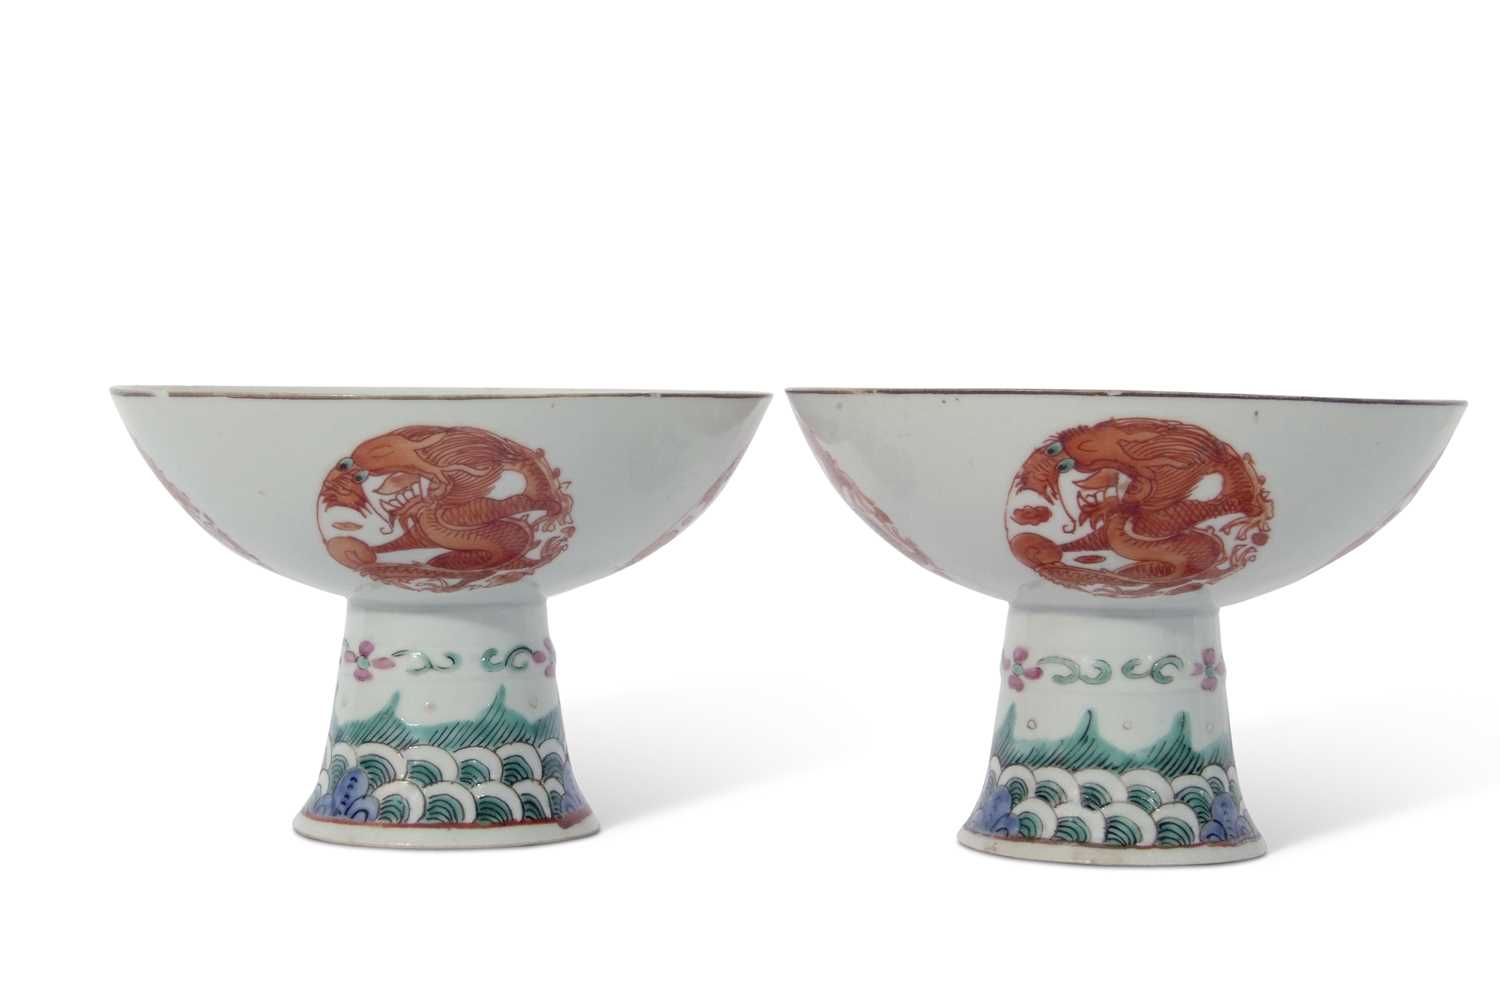 Pair of Chinese porcelain stem cups, late Qing dynasty, decorated in iron red with phoenix to the